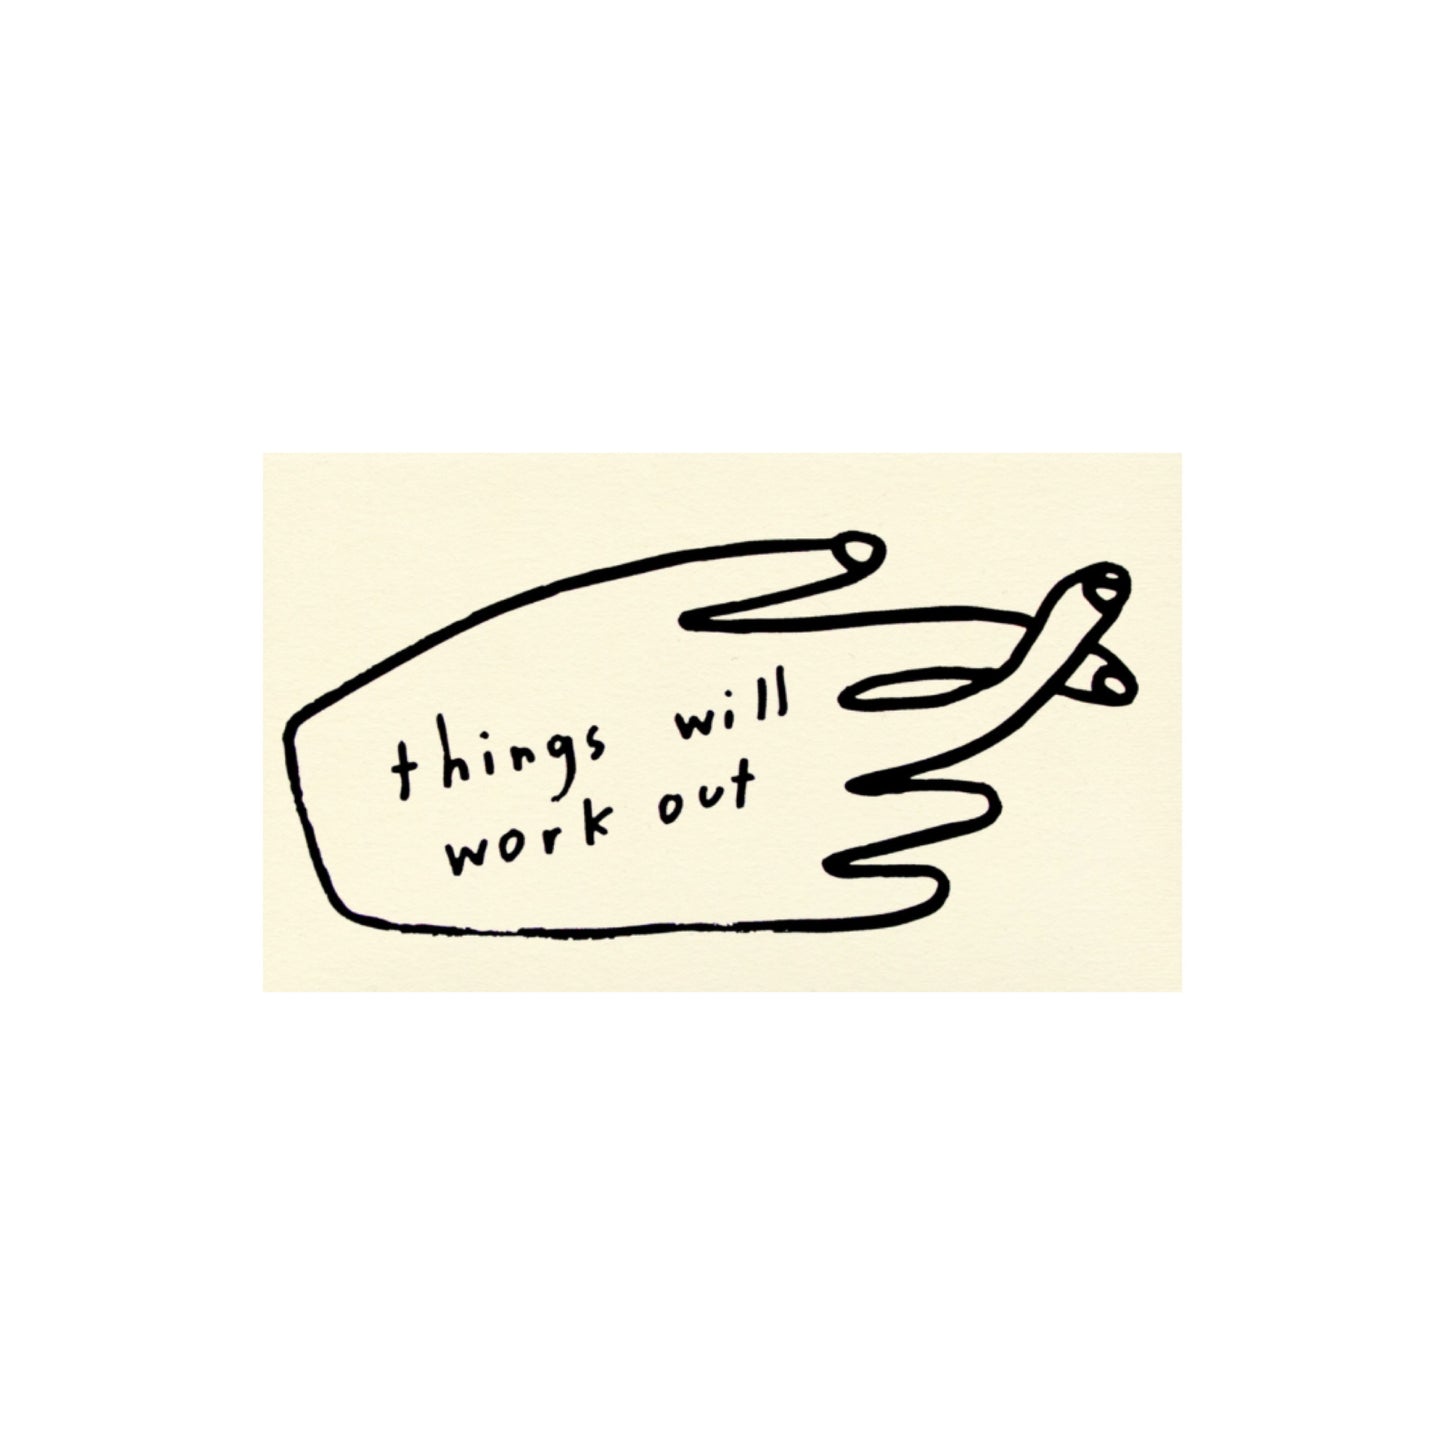 things will work out card